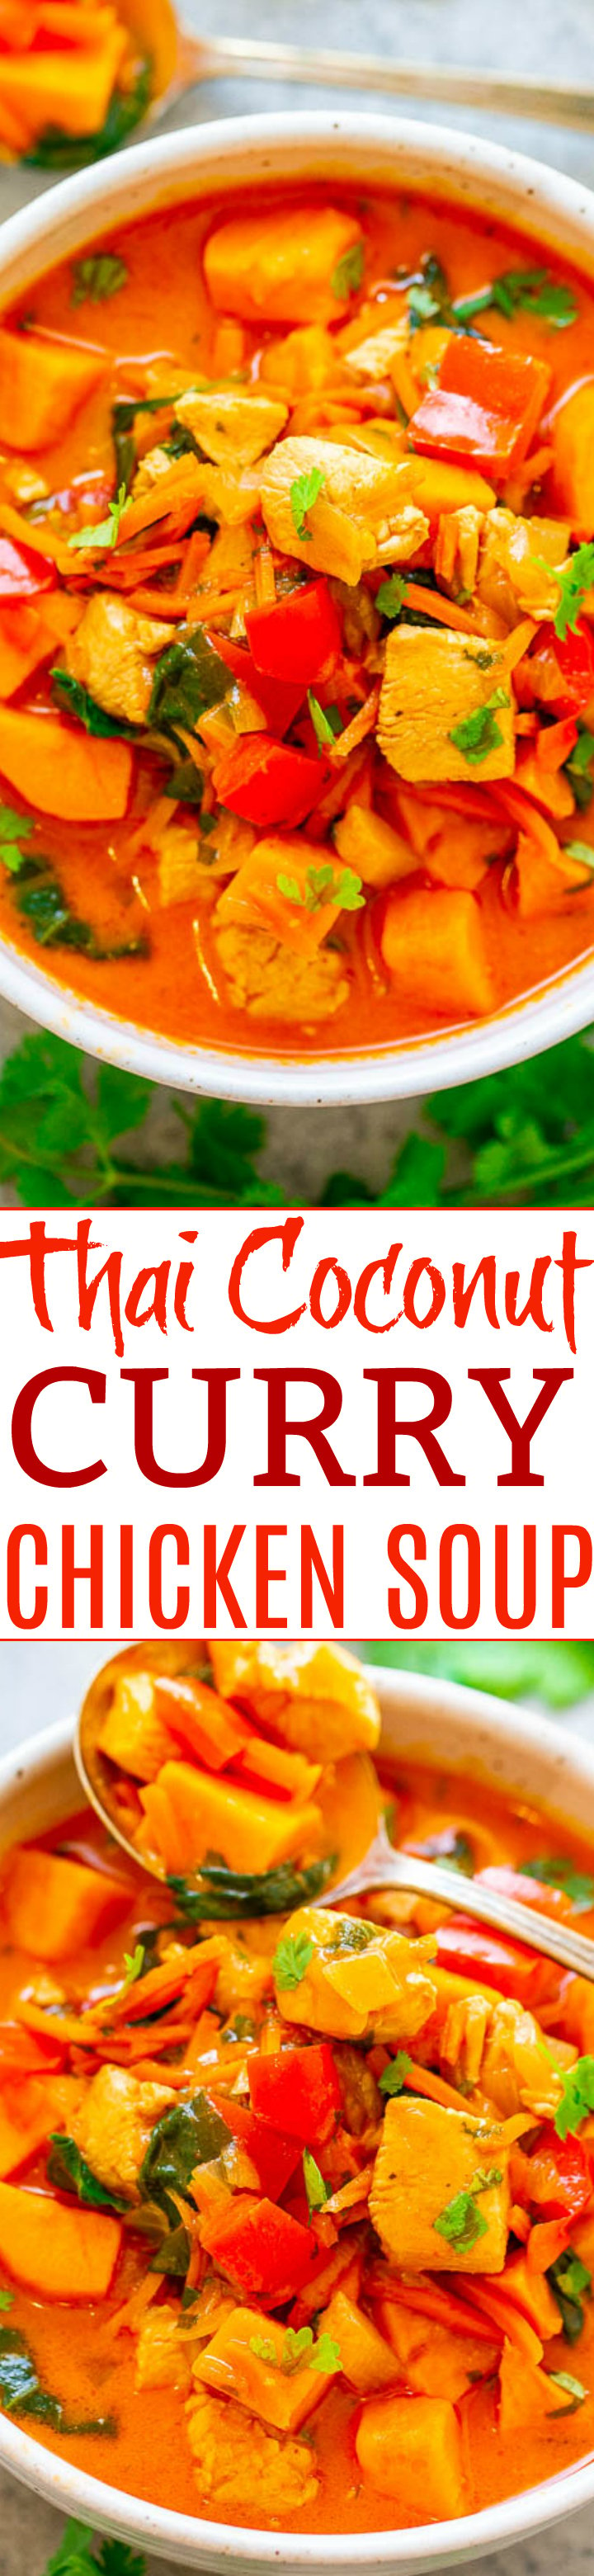 Thai Coconut Curry Chicken Soup - EASY, ready in 30 minutes, HEALTHY, and loaded with FLAVOR!! The sweet potatoes, carrots, red peppers, chicken, spinach, cilantro, and coconut milk broth combine to form an AMAZING soup!!